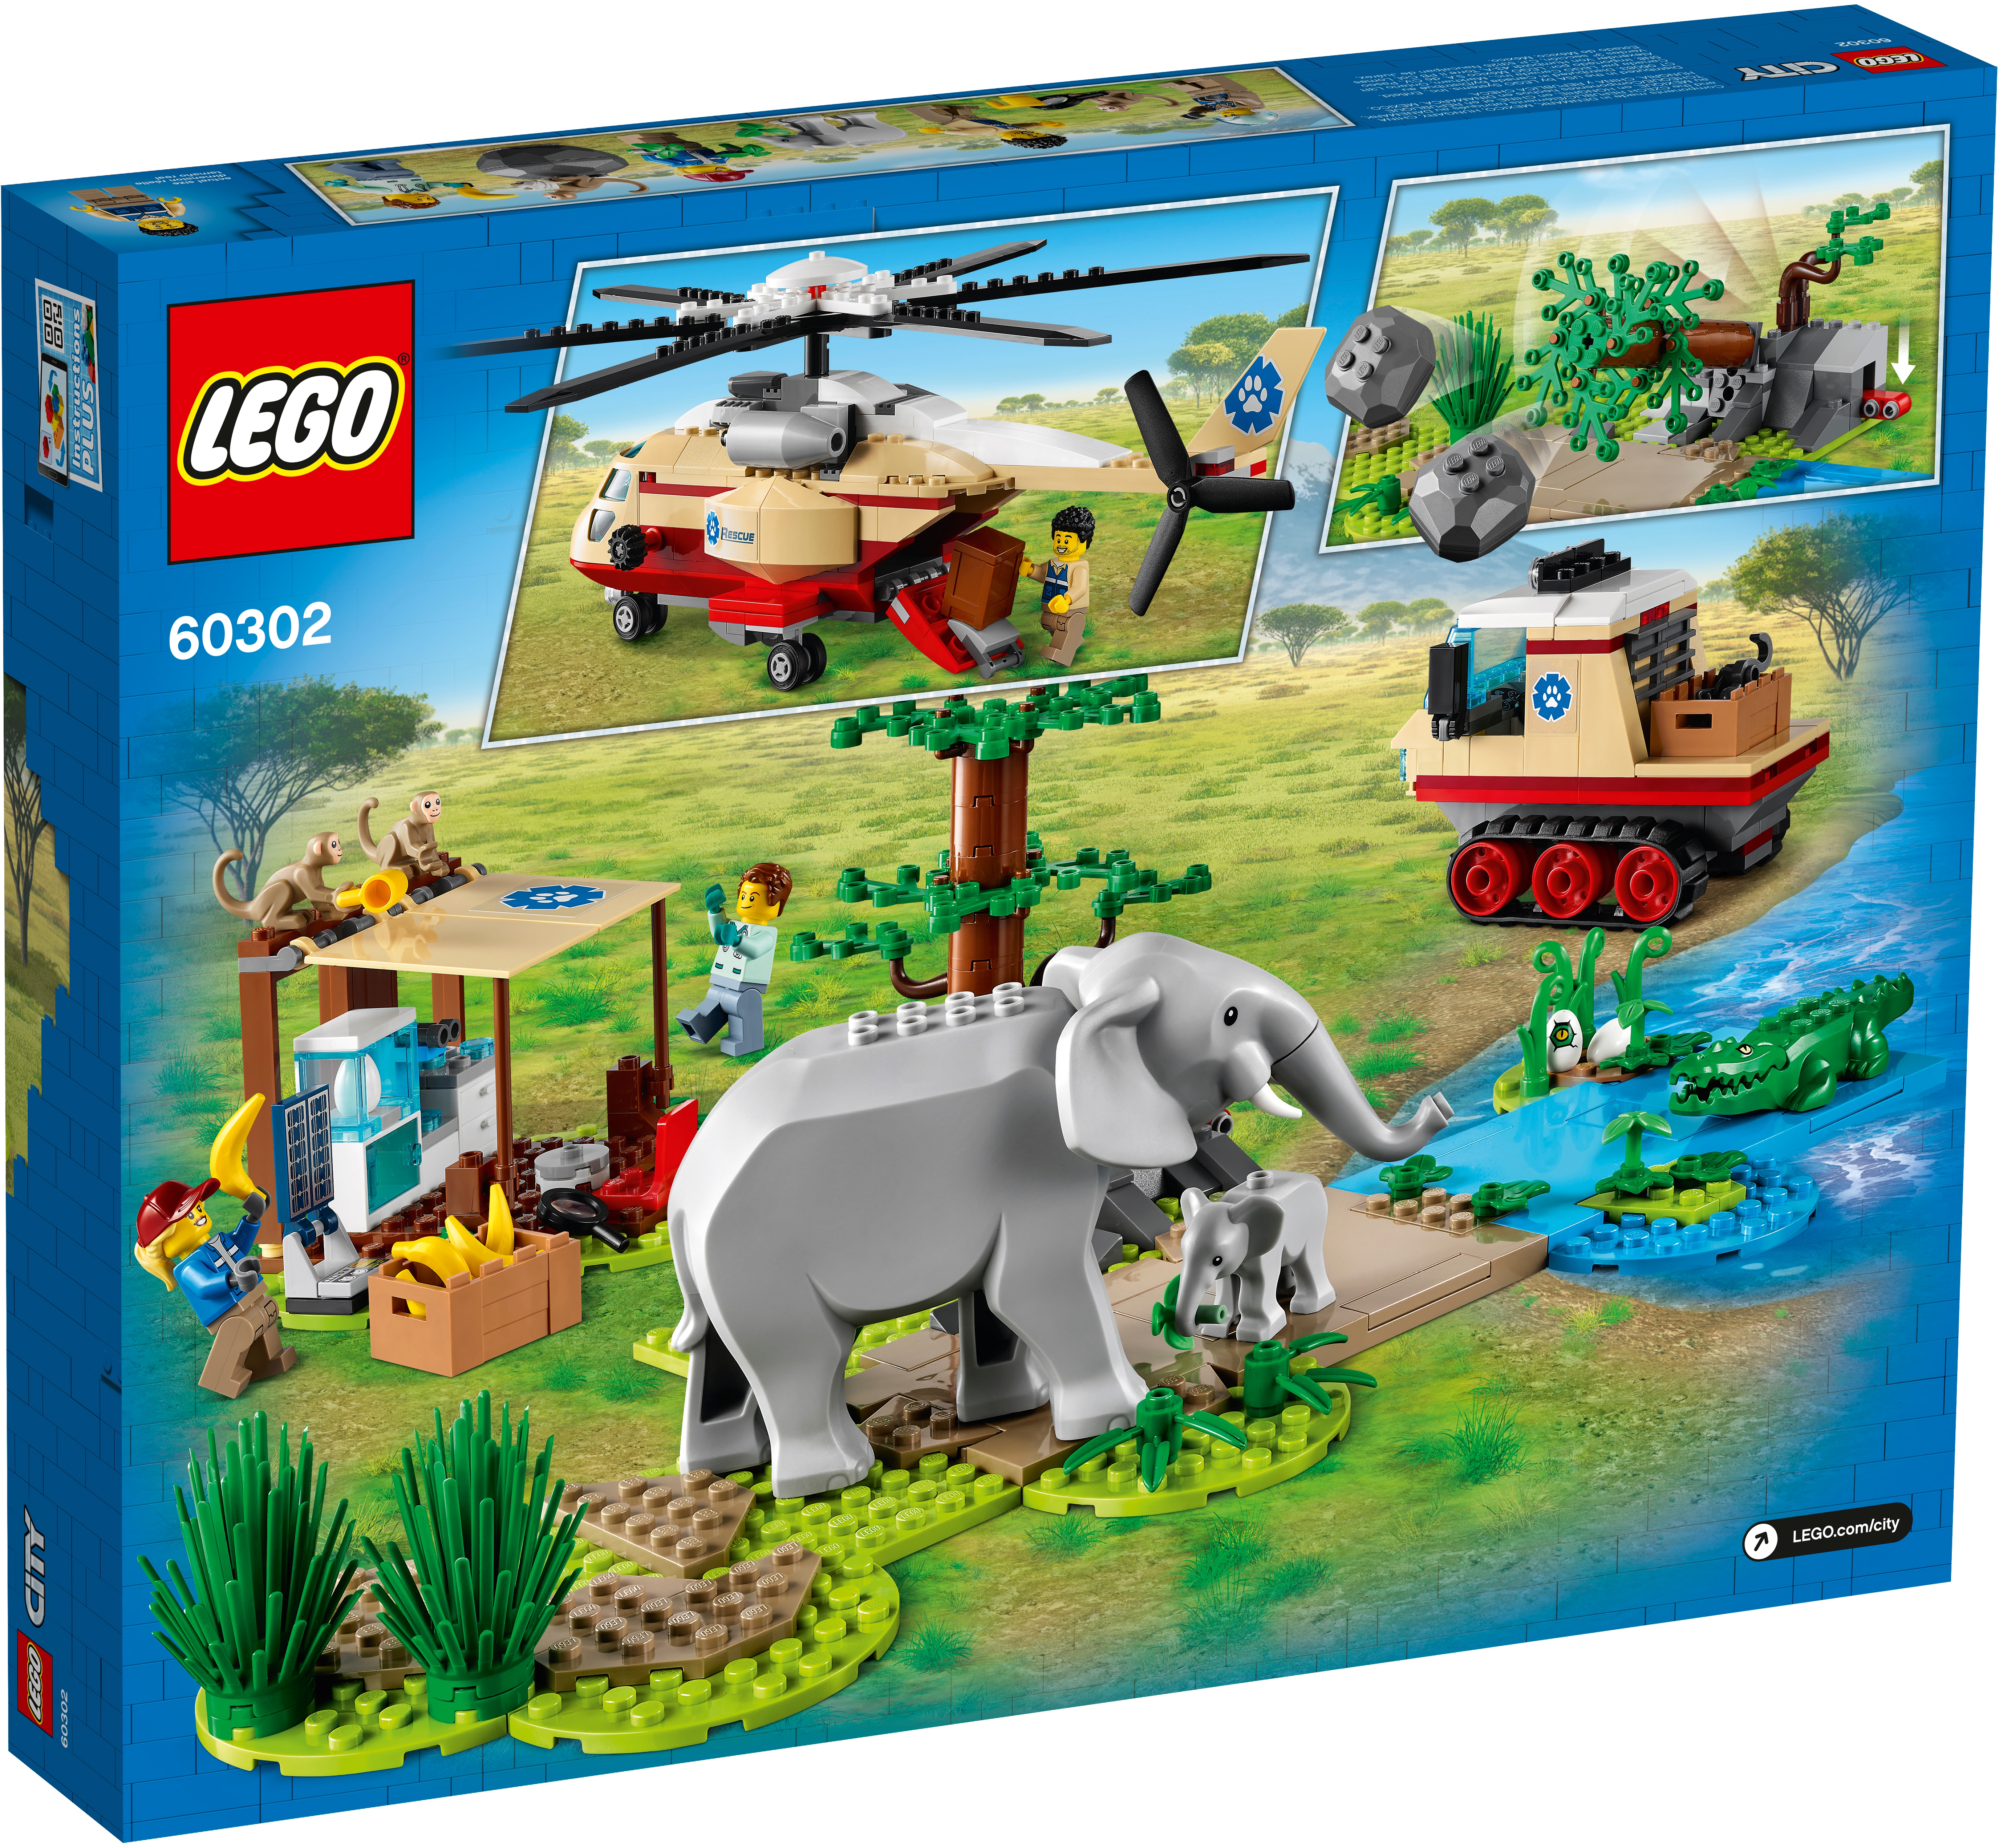 Lego City Animal Land chien blanc Chiot standing r1 NEUF amis 